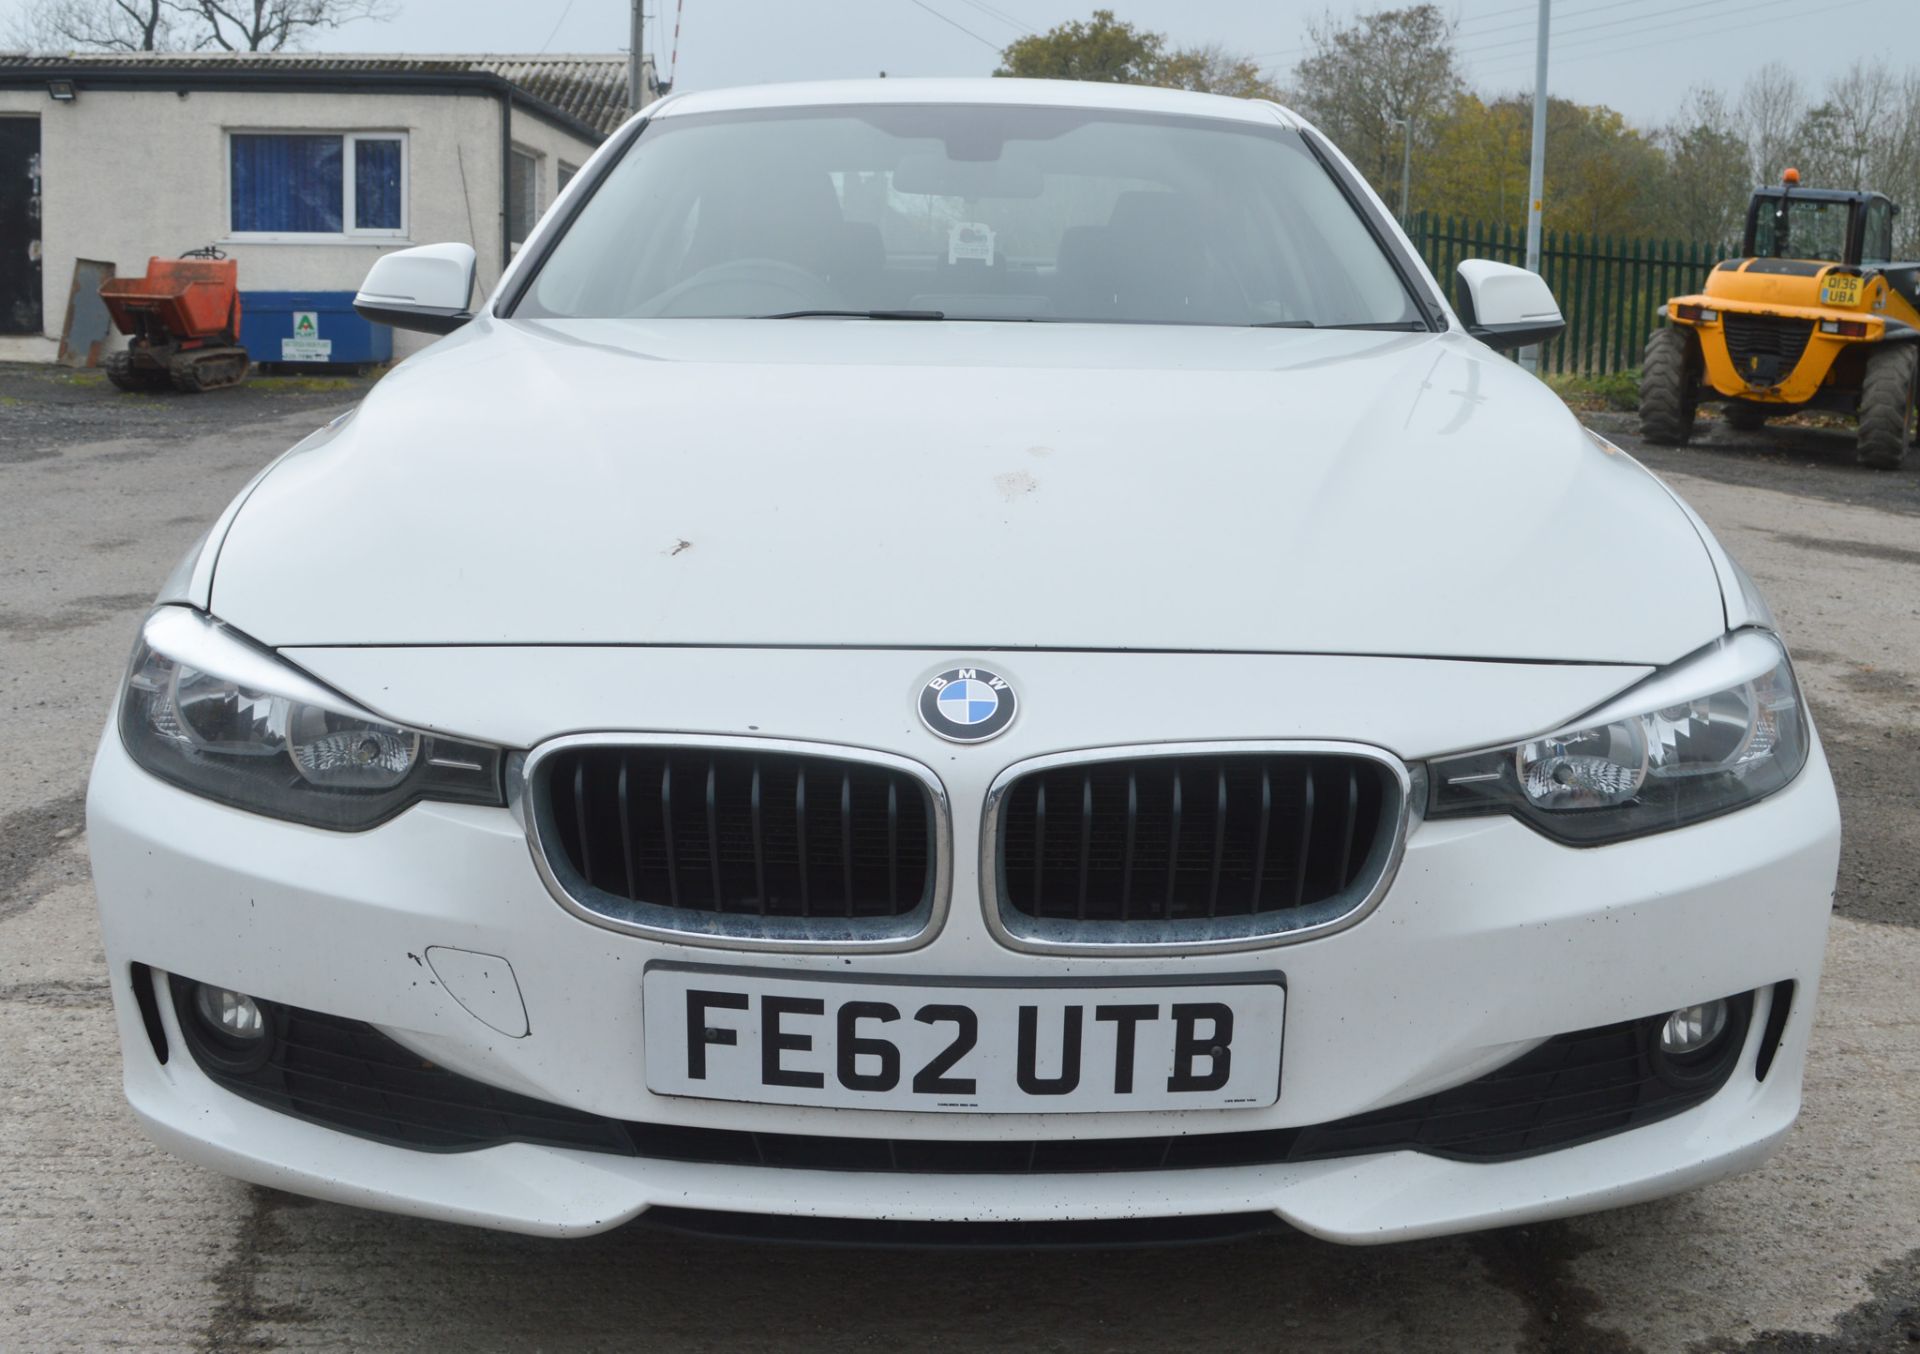 BMW 3 Series 2.0 320d Sport 4dr automatic saloon car  Registration Number: FE62 UTB Date of - Image 4 of 18